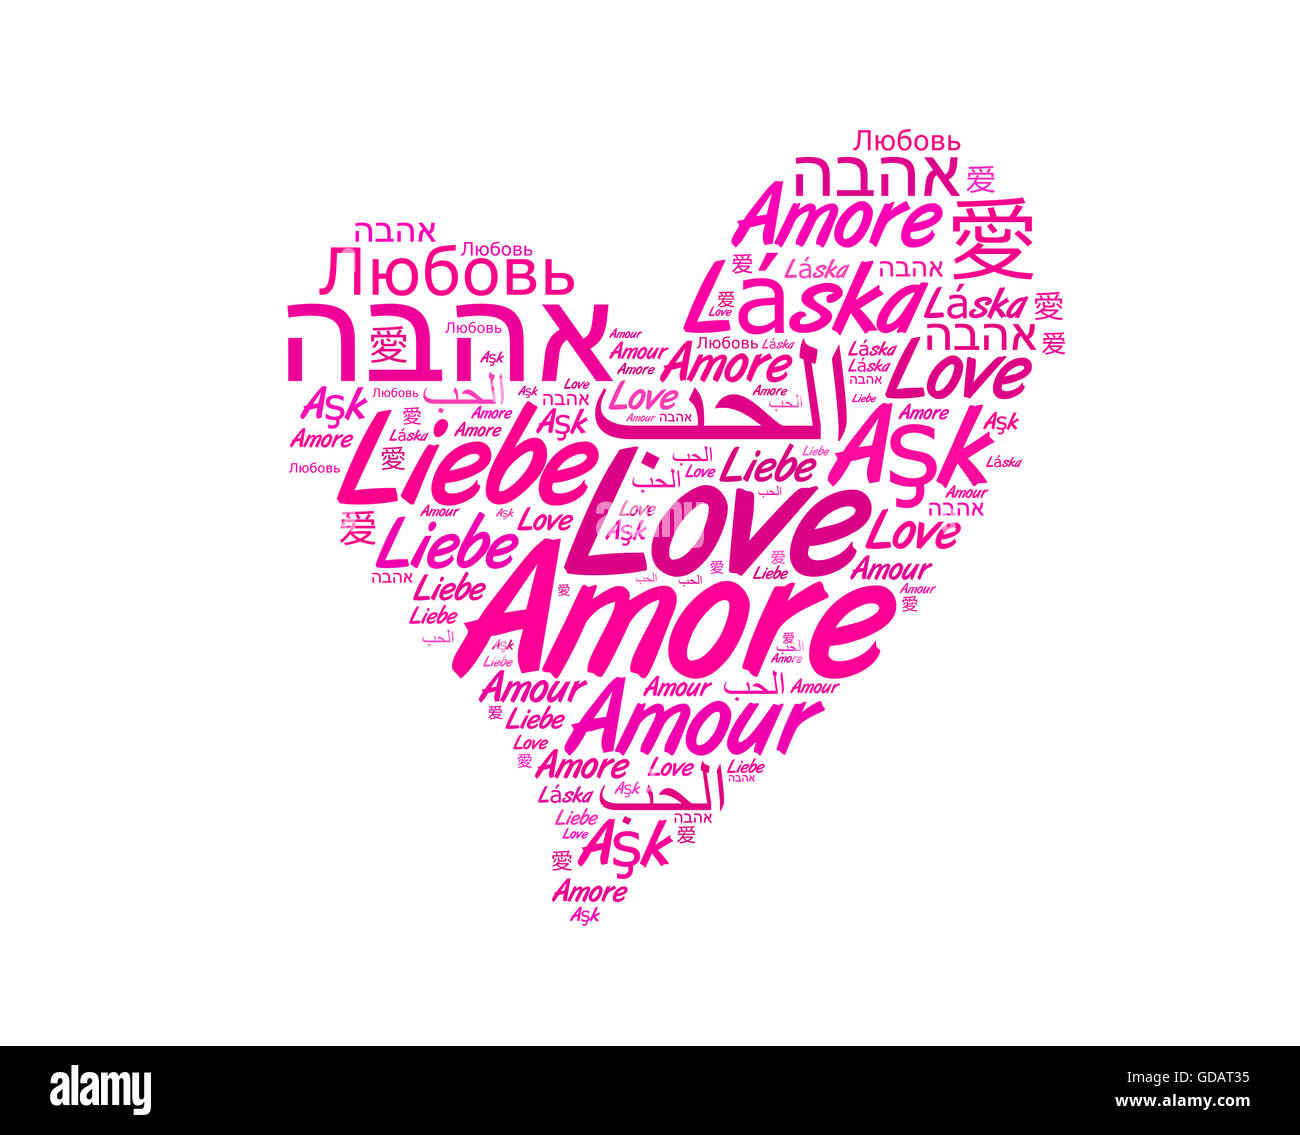 Love concept word cloud in many languages of the world Stock Photo